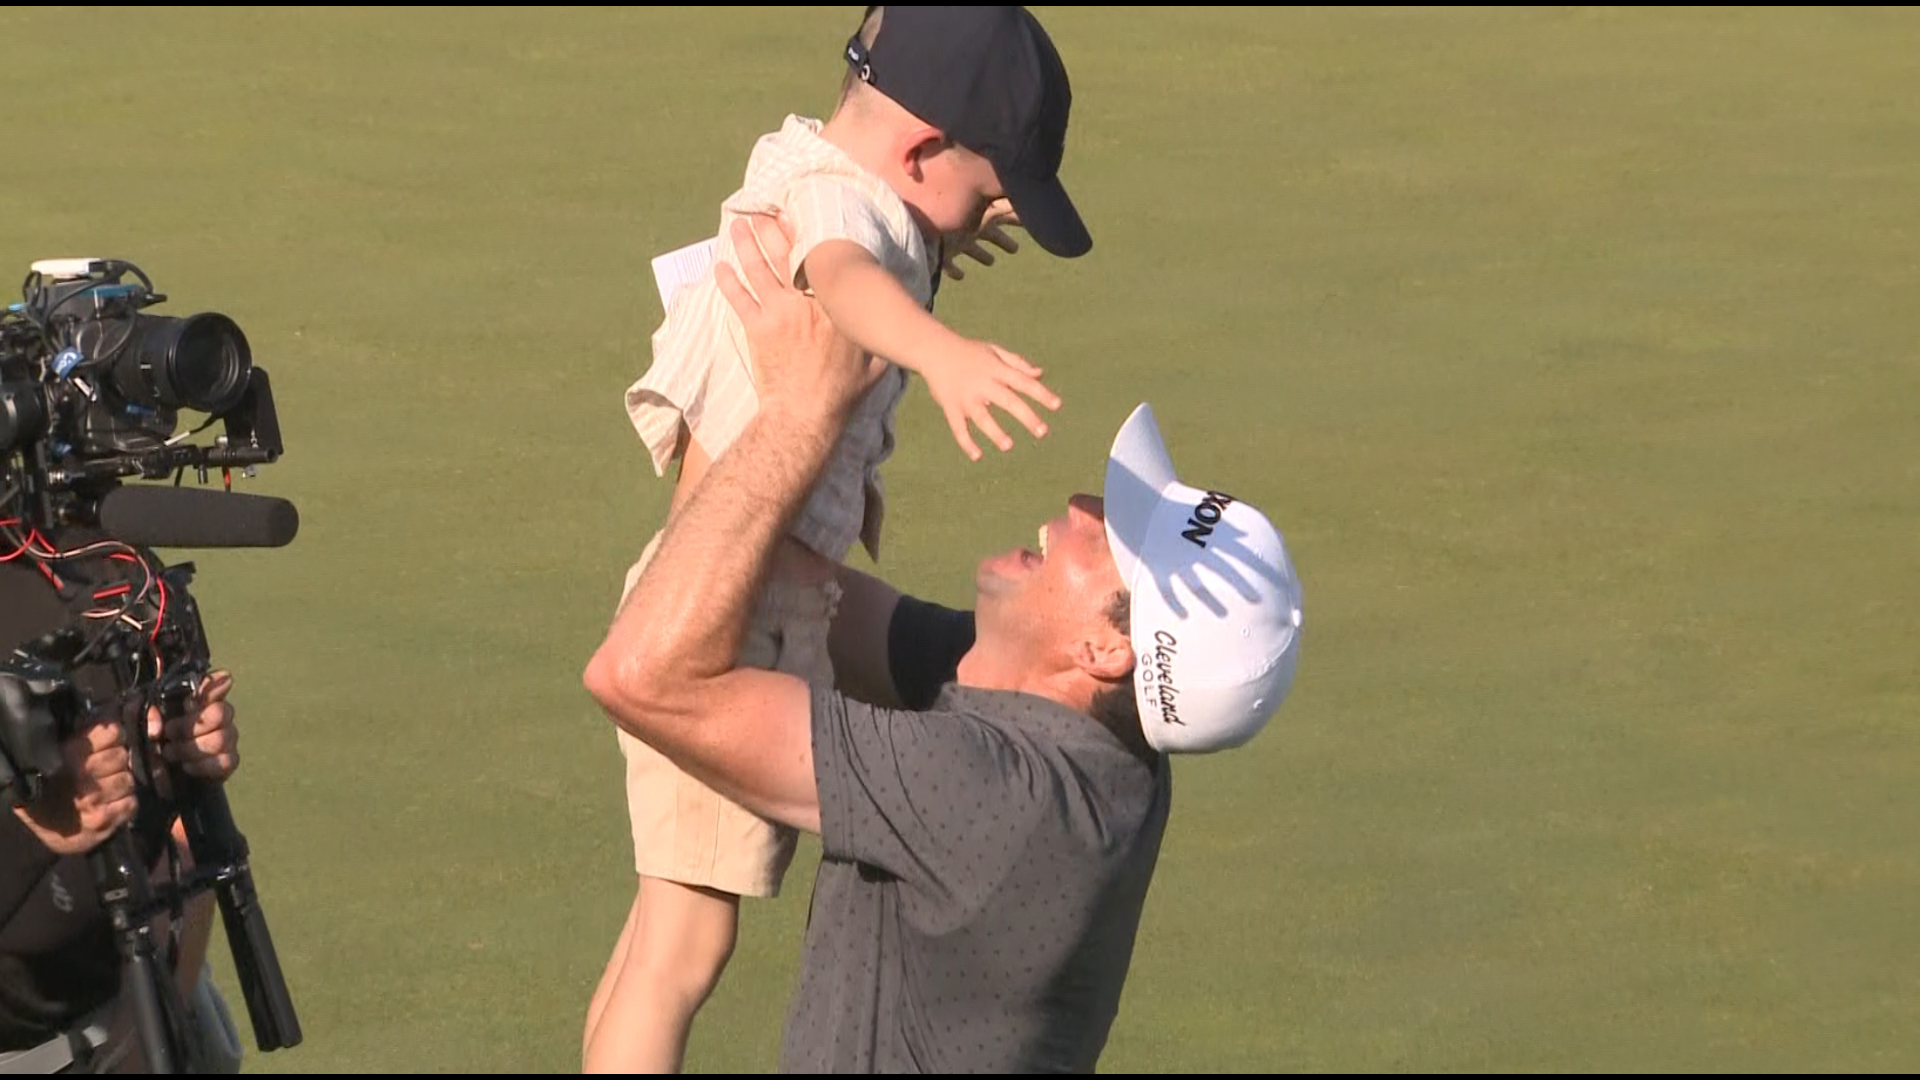 Bradley immediately went to his family to celebrate his victory at the Travelers Championship.